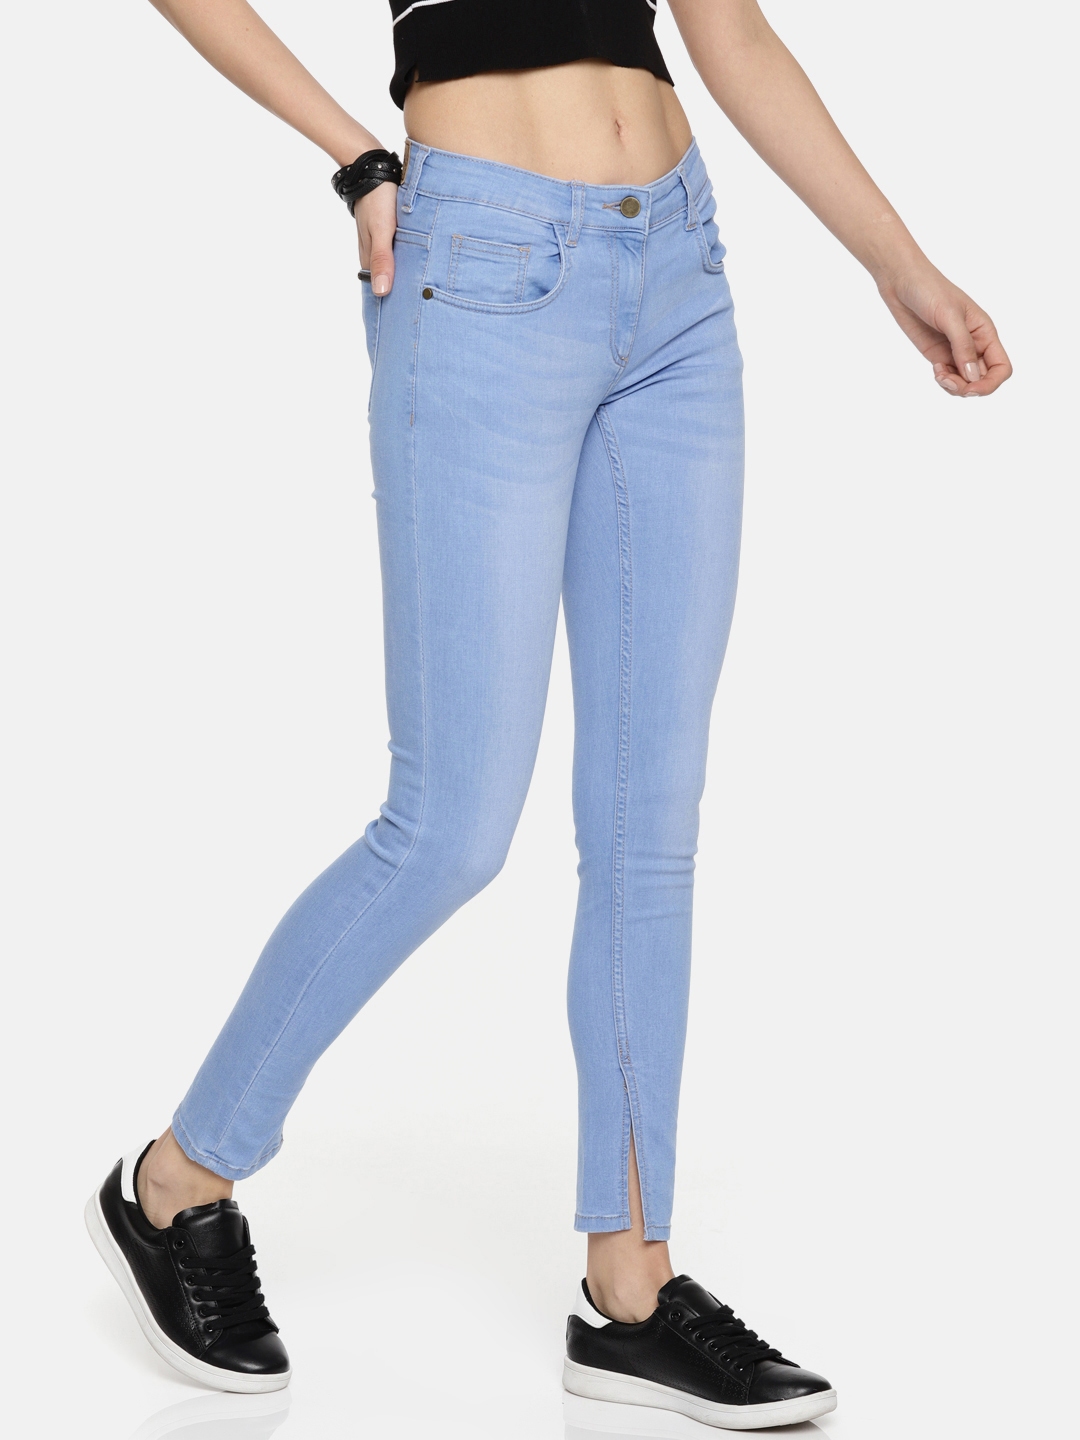 Buy Roadster Women Blue Skinny Fit Mid Rise Clean Look Stretchable Jeans - Jeans for Women 